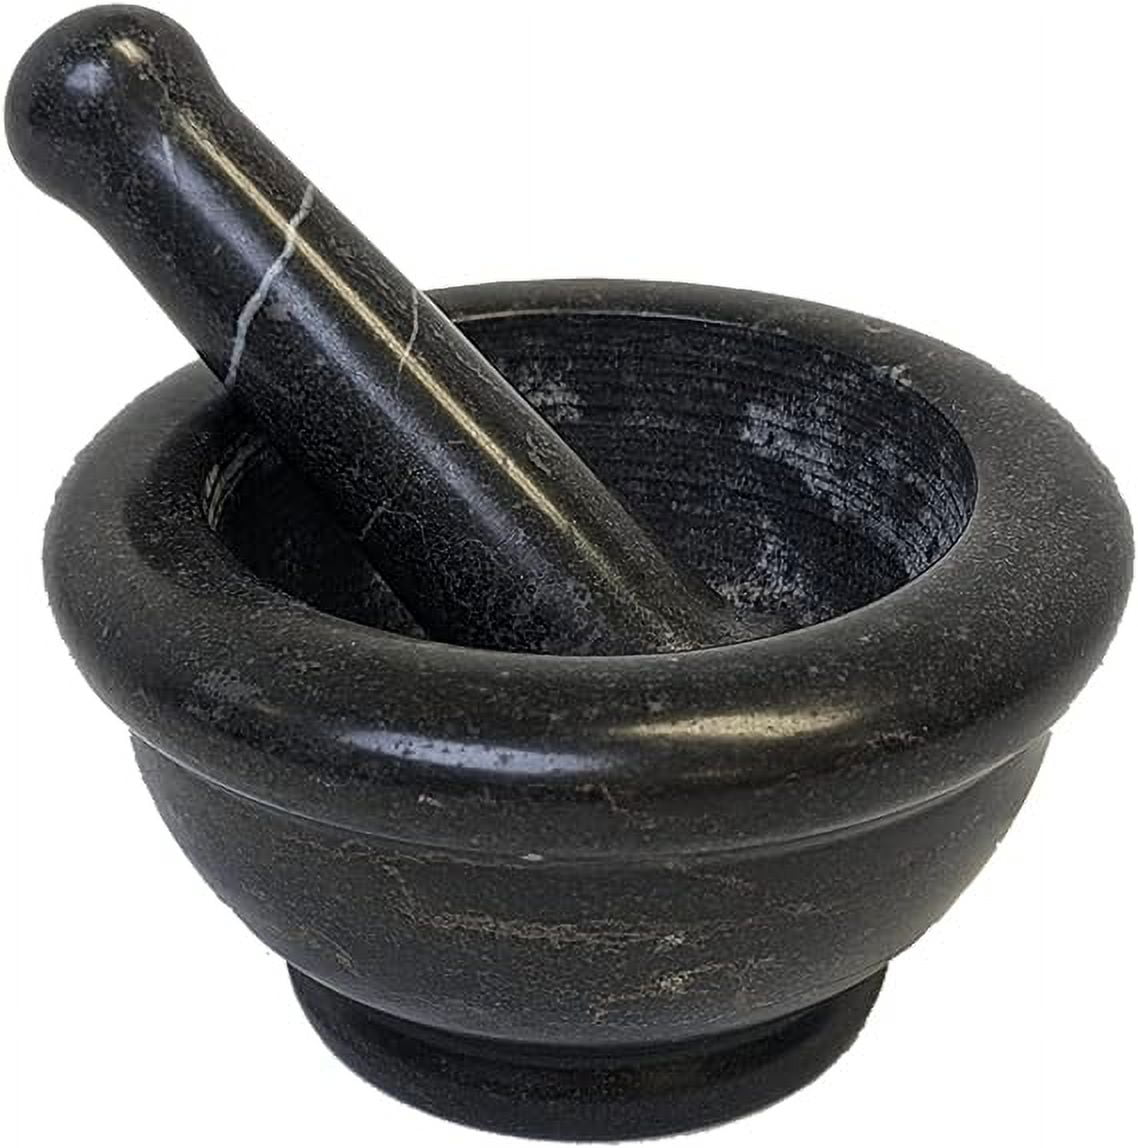 Velaze Granite Mortar and Pestle Set, 6.5 inch Pestle and 19.5 oz  Mortar,Natural Unpolished, Non Porous Spice Grinder, Small Bowl for Kitchen  Spices